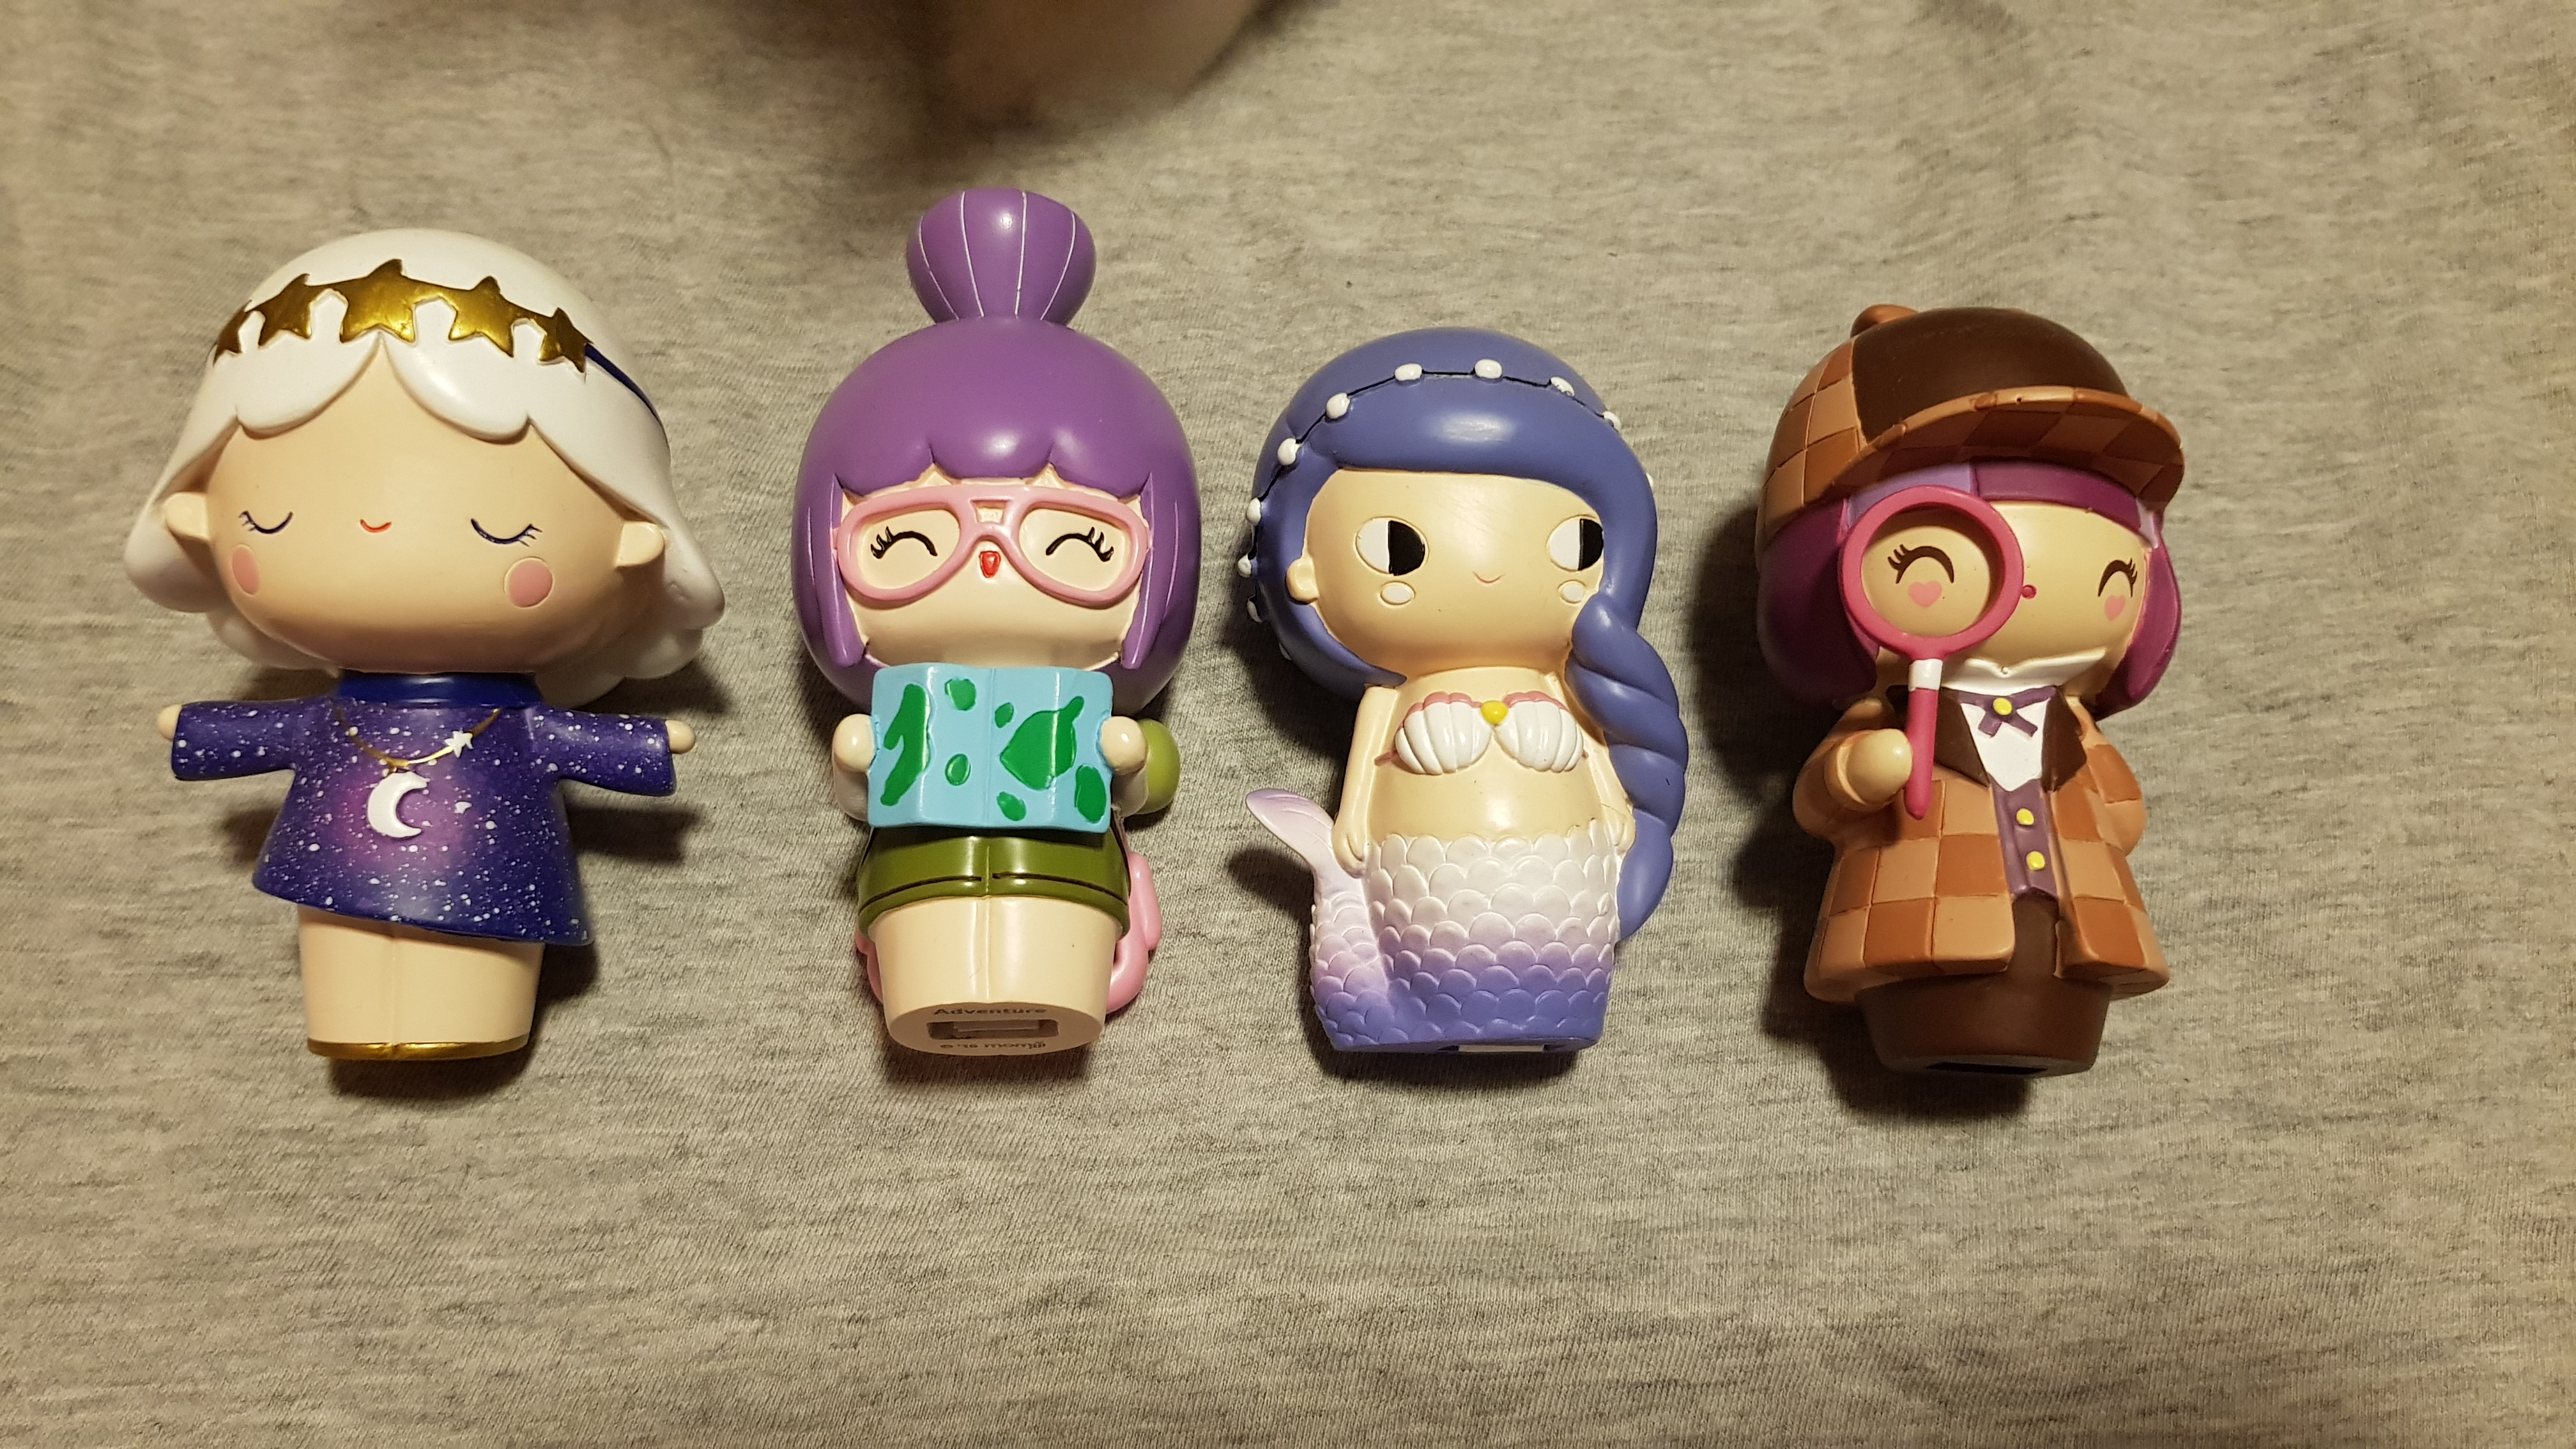 Four small dolls made of tree resin. The first has white hair with a gold star headband and blue dress with white stars on it and a moon necklace. The second has purple hair and glasses and is holding a map of the world. The third has a purple mermaid tail, shell bra, purple hair and a headband. The fourth is wearing a brown checkered coat and detective cap and is holding a pink magnifying glass.